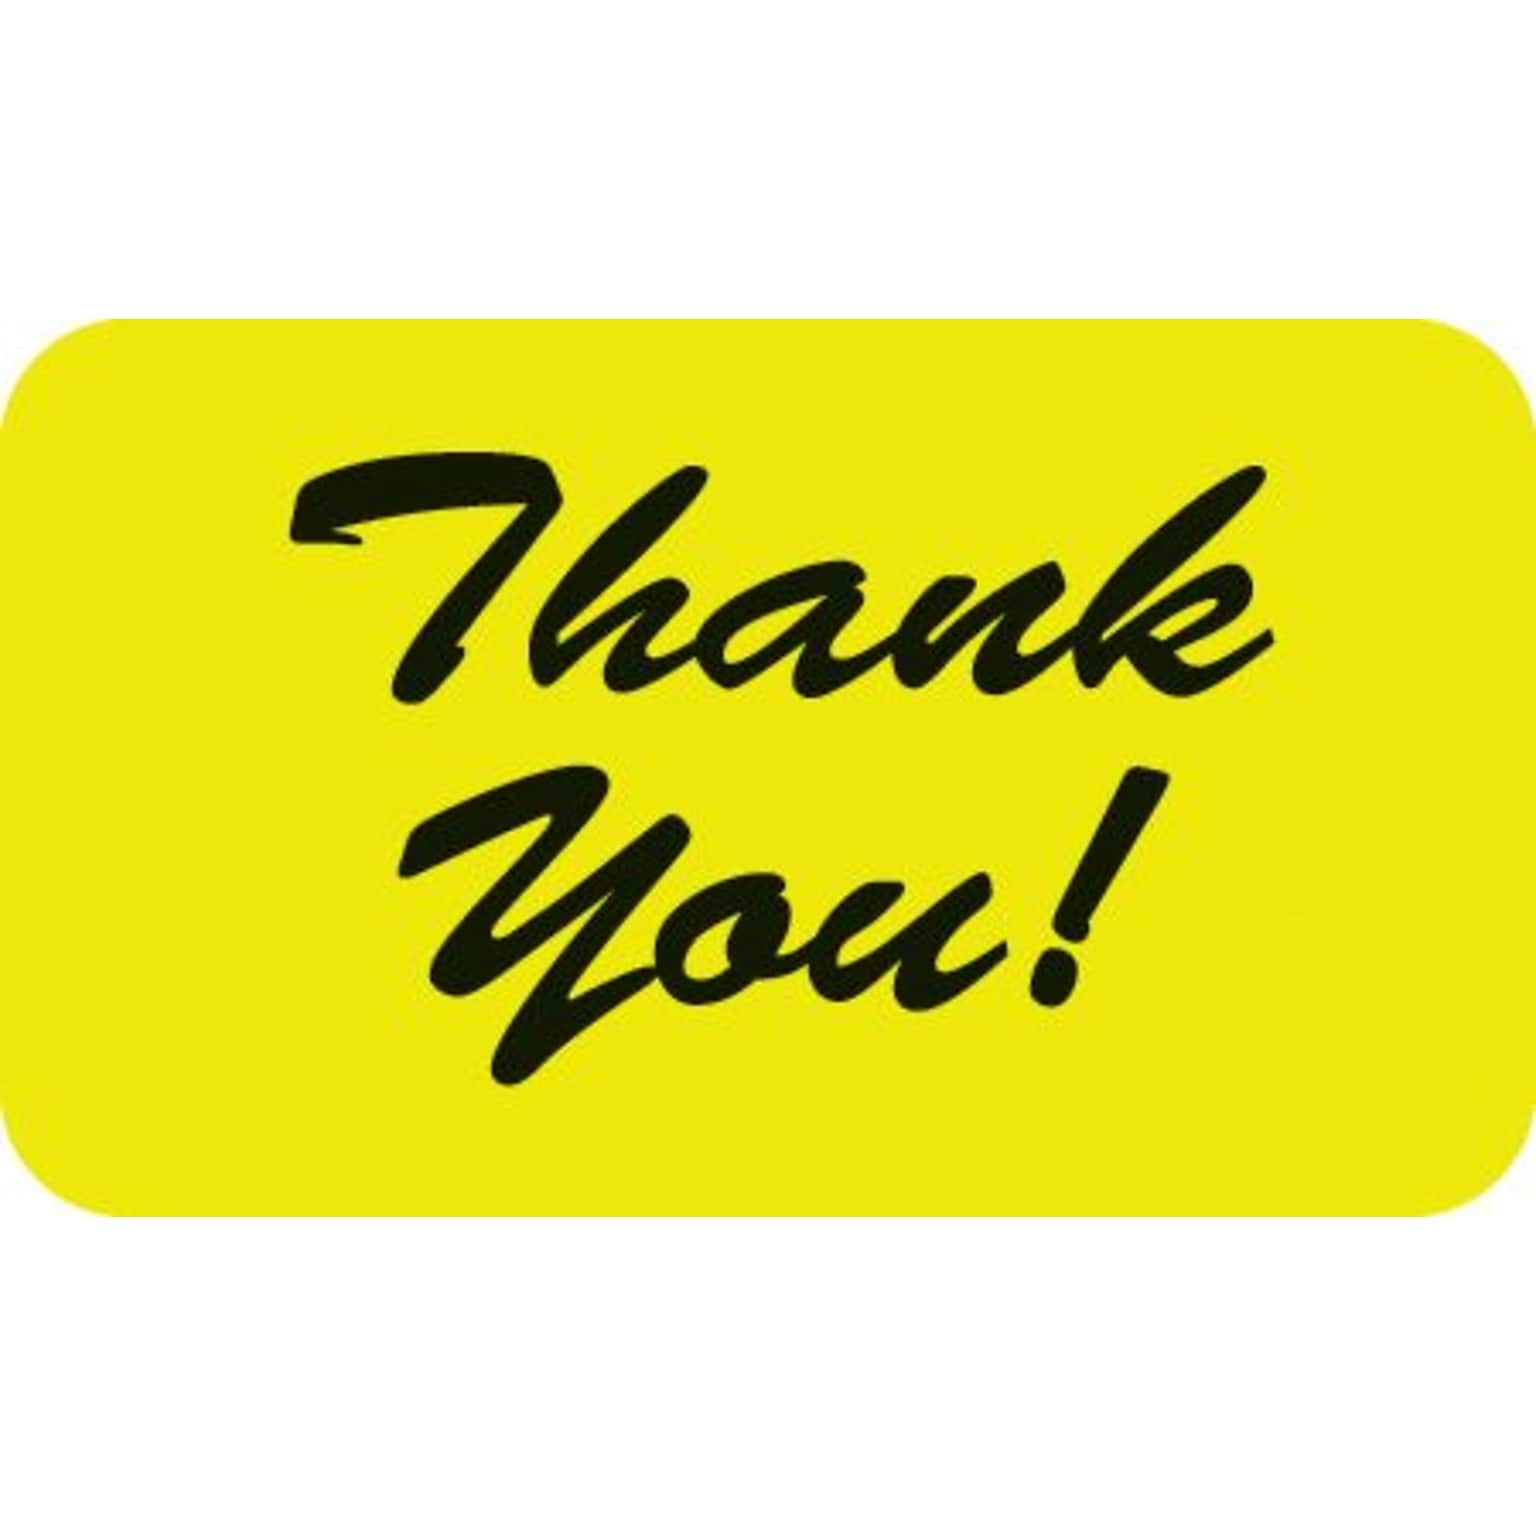 Medical Arts Press® Reminder & Thank You Collection Labels, Thank You!, Fluorescent Chartreuse, 7/8x1-1/2, 500 Labels